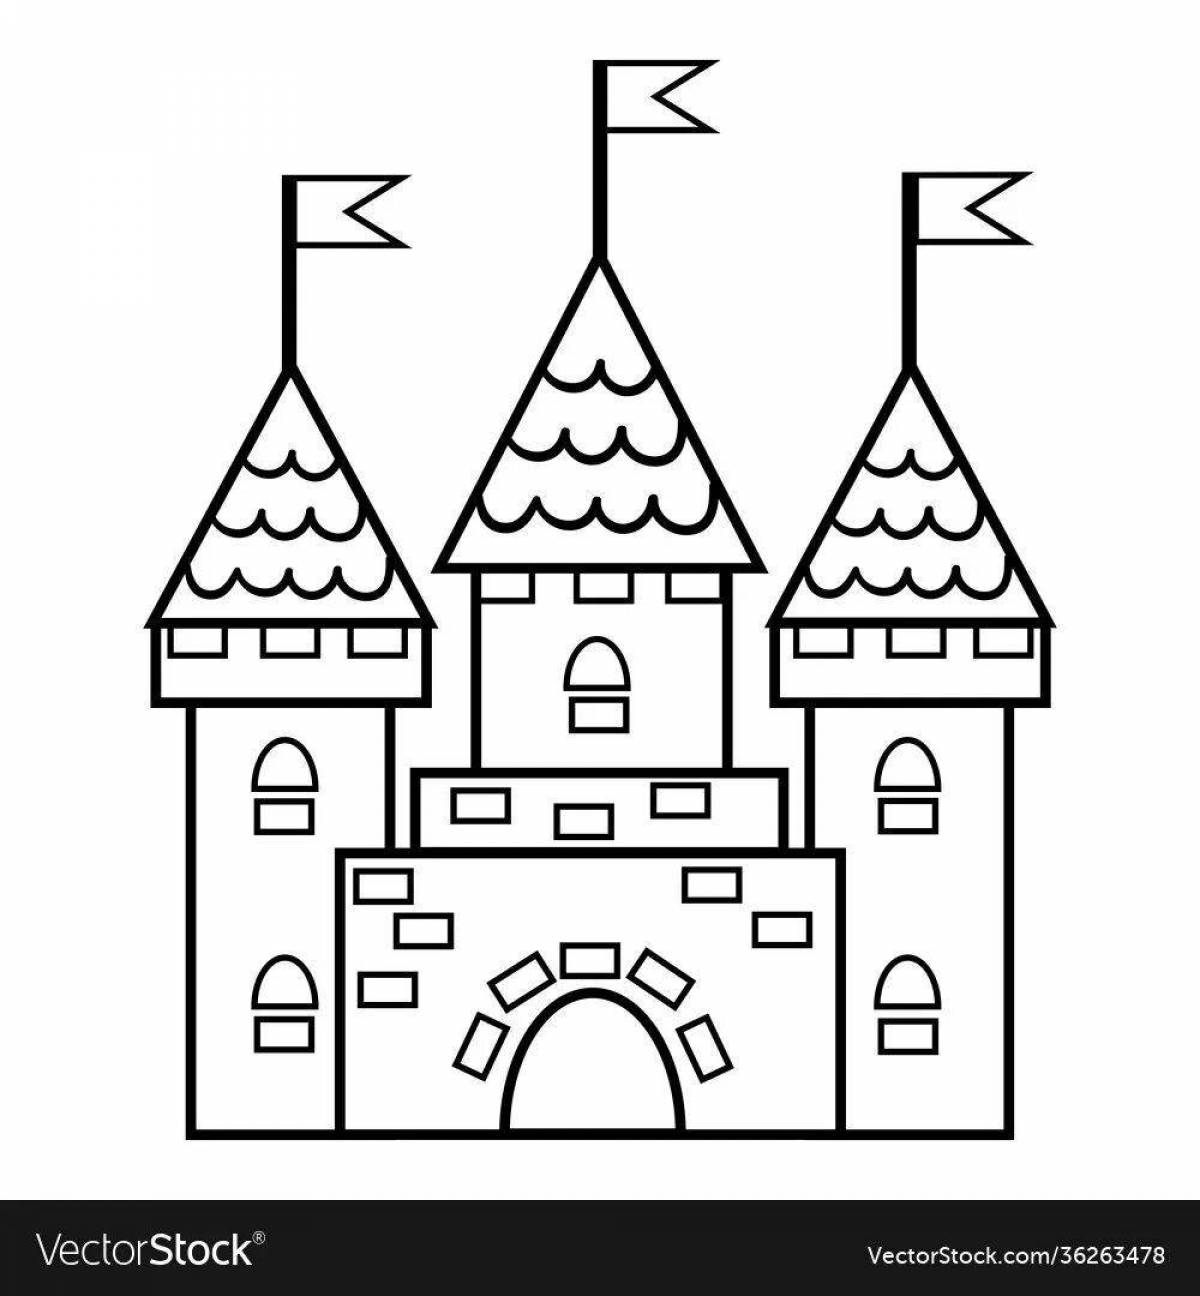 Impressive castle coloring book for 4-5 year olds